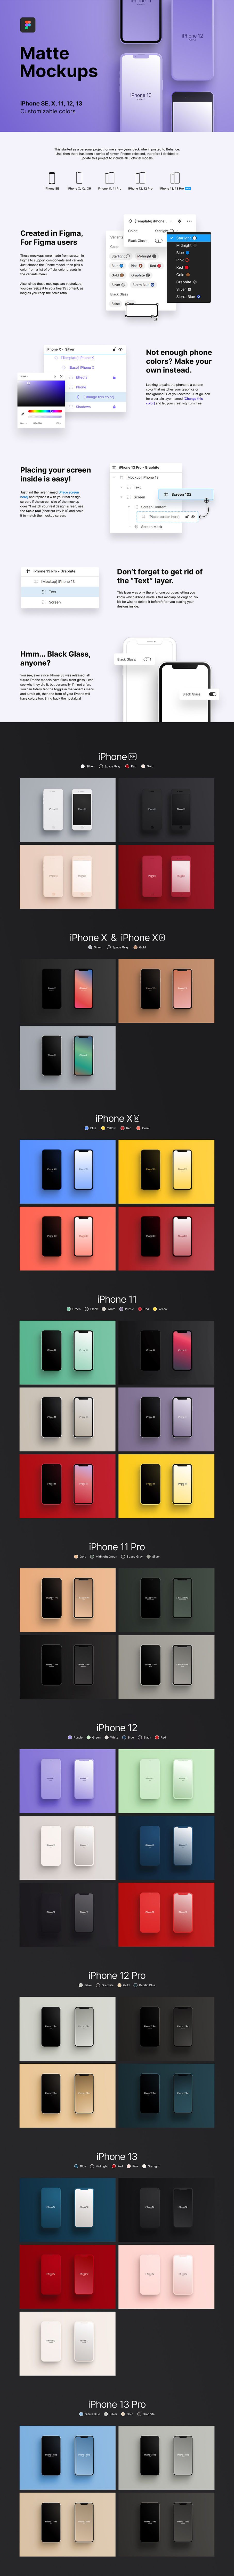 Free Matte iPhone Mockups for Figma